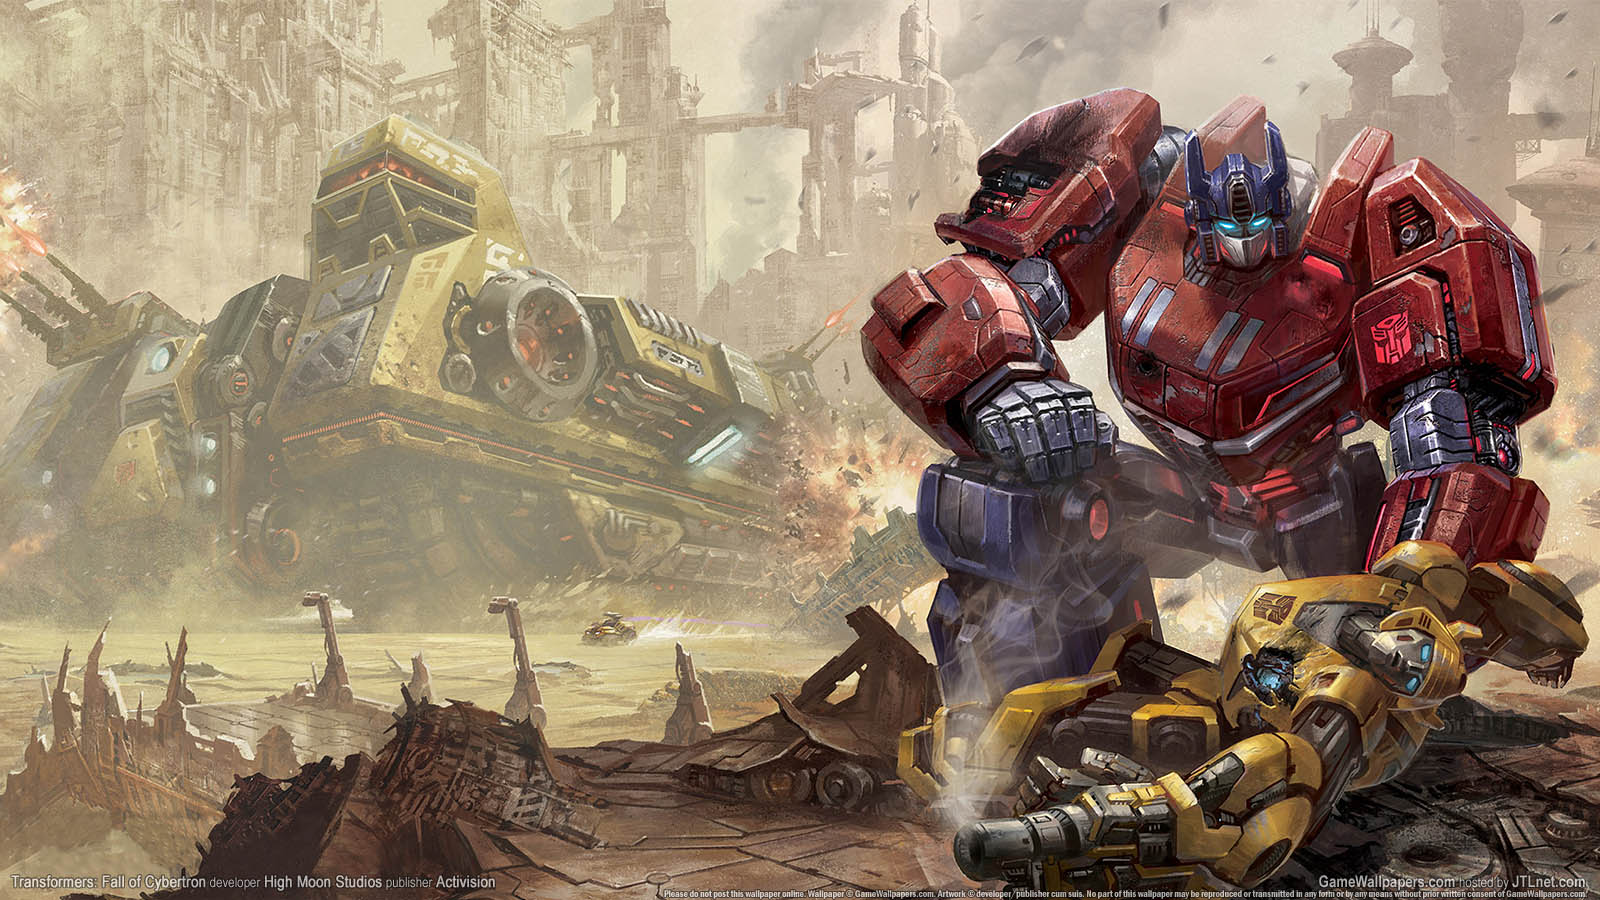 Transformers: Fall of Cybertron achtergrond 01 1600x900